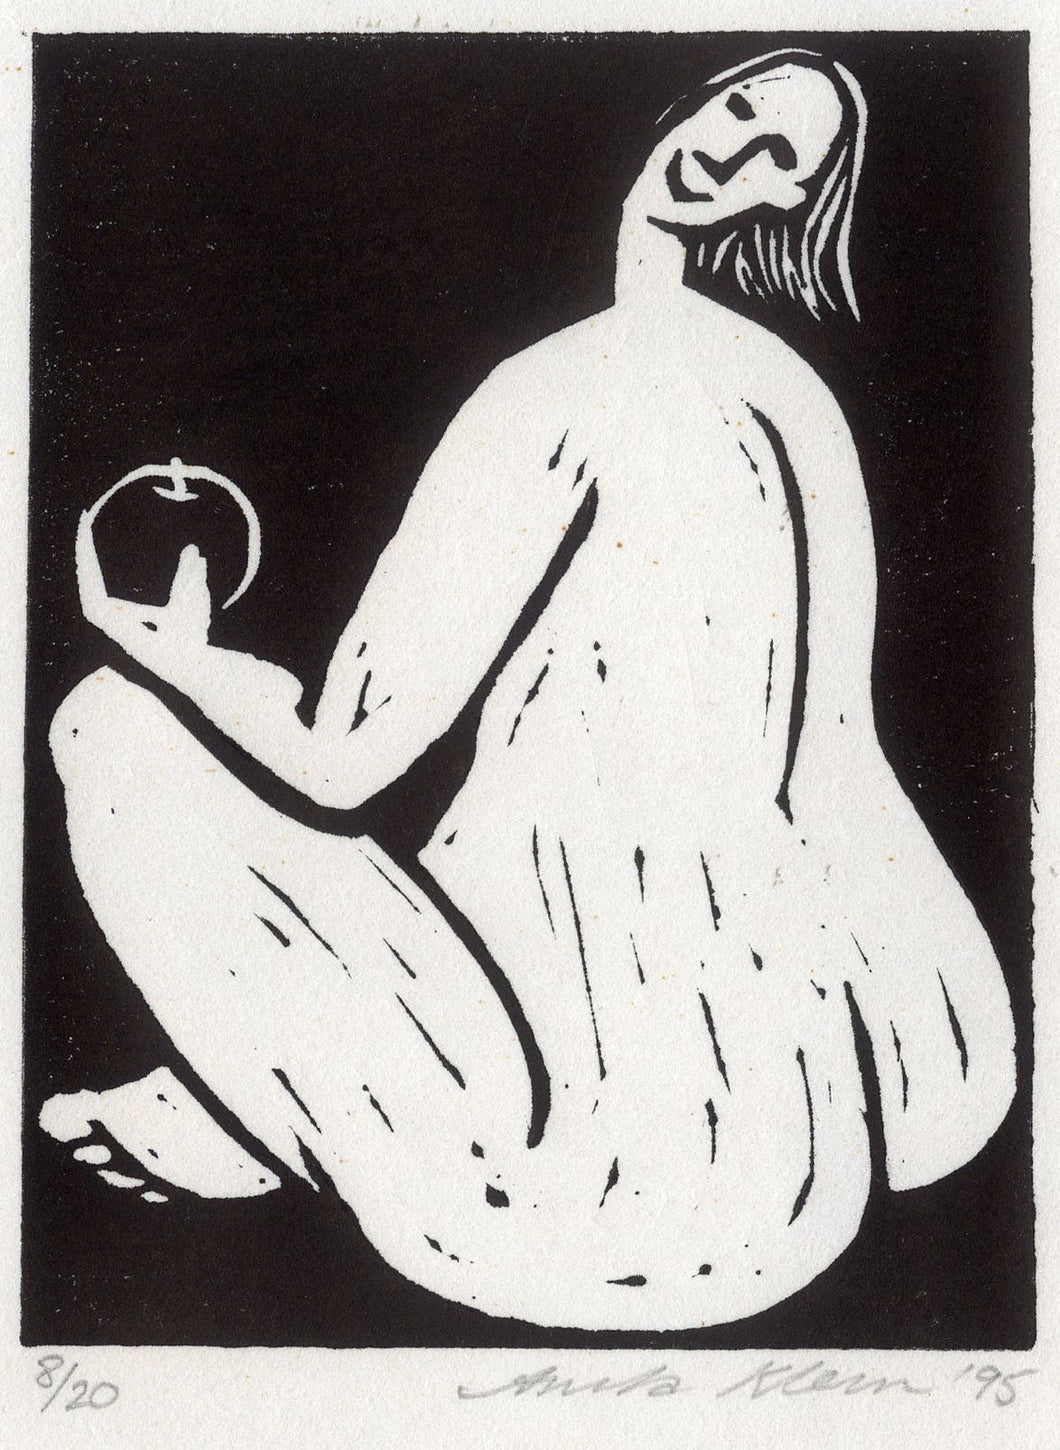 [Eve or Woman with Apple]